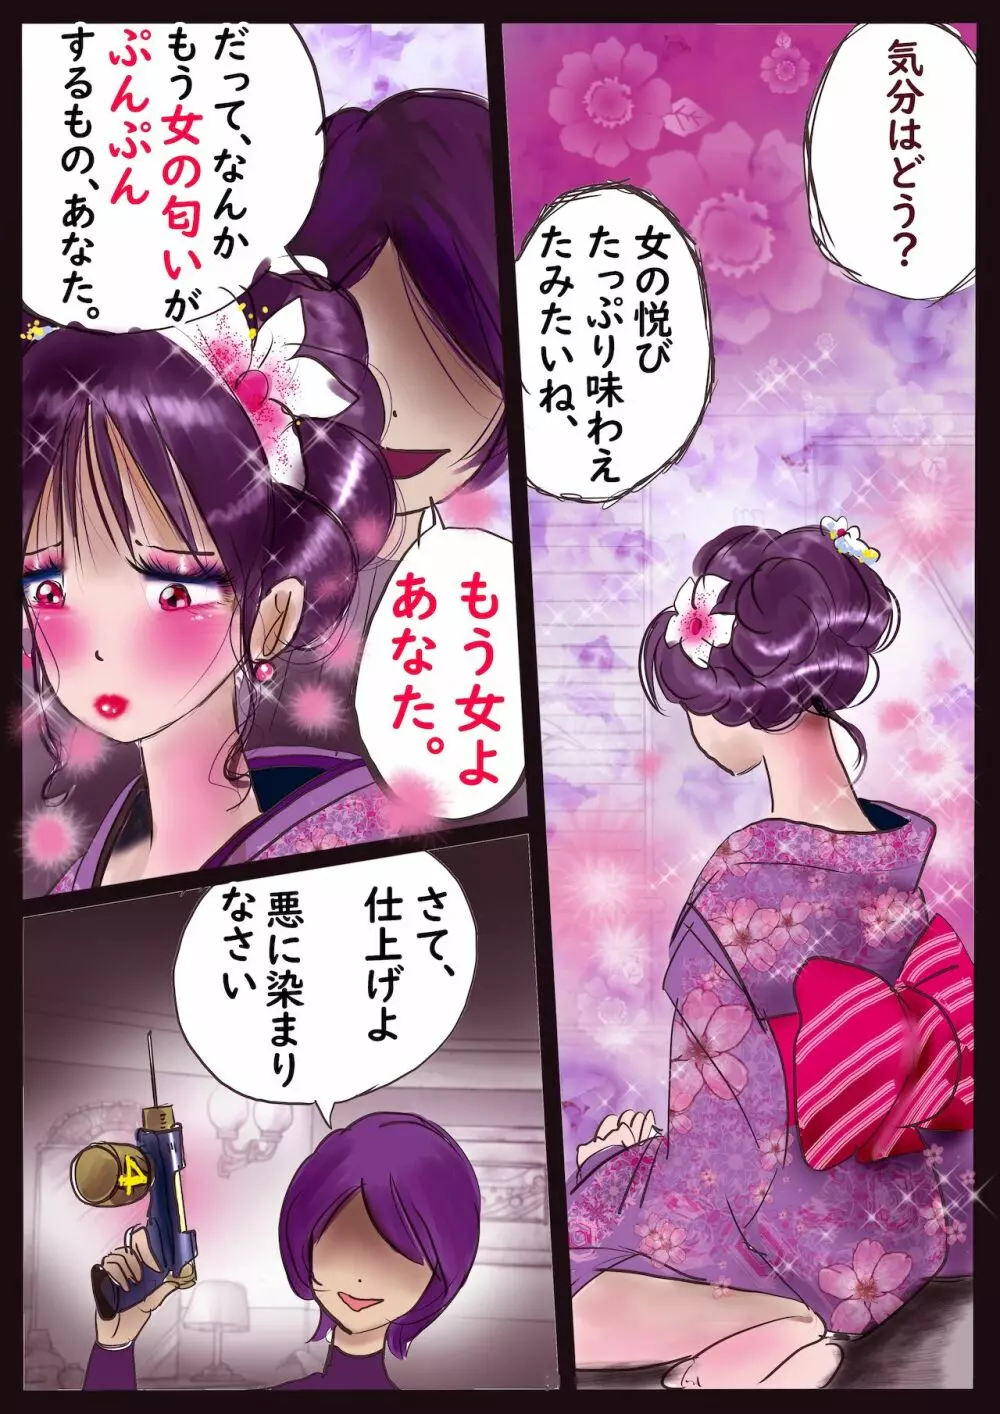 Kの悪癖 2 - page7